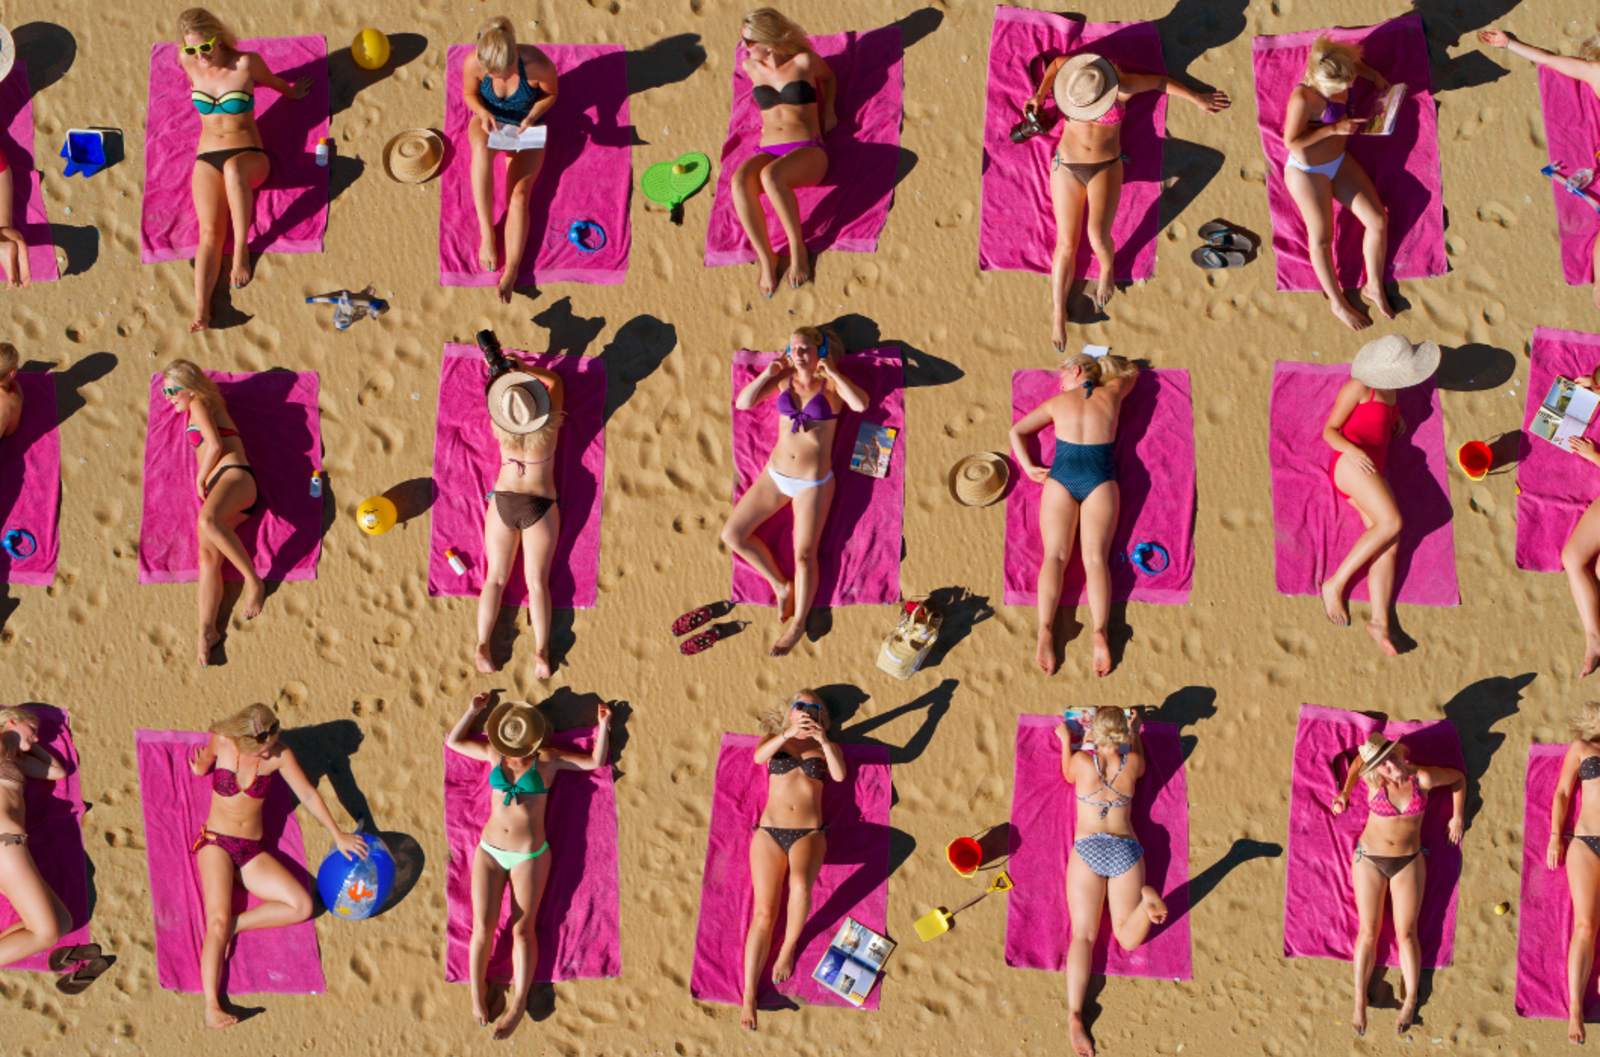 large group of sunbathers lying on pink towels on a beach.